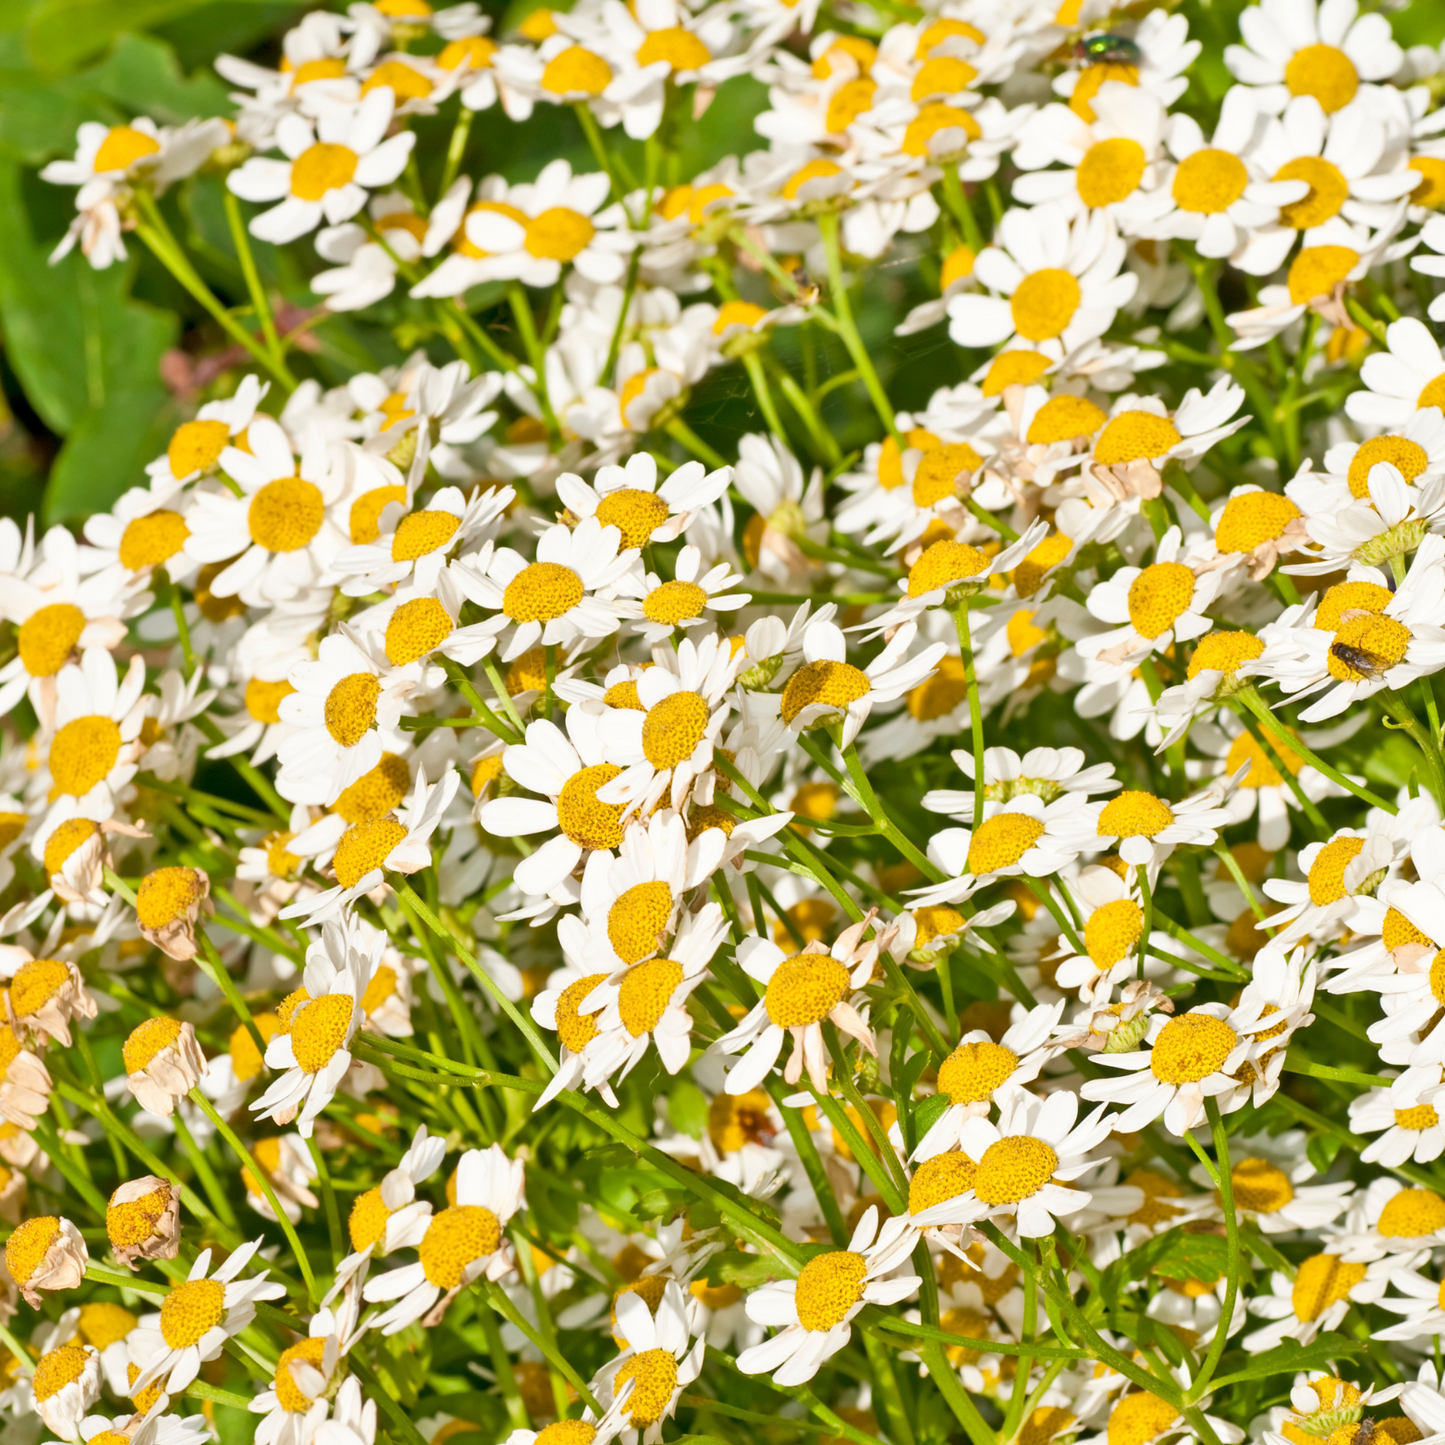 Witchy Pooh's Feverfew Herb For Protection Rituals from Disease and Evil